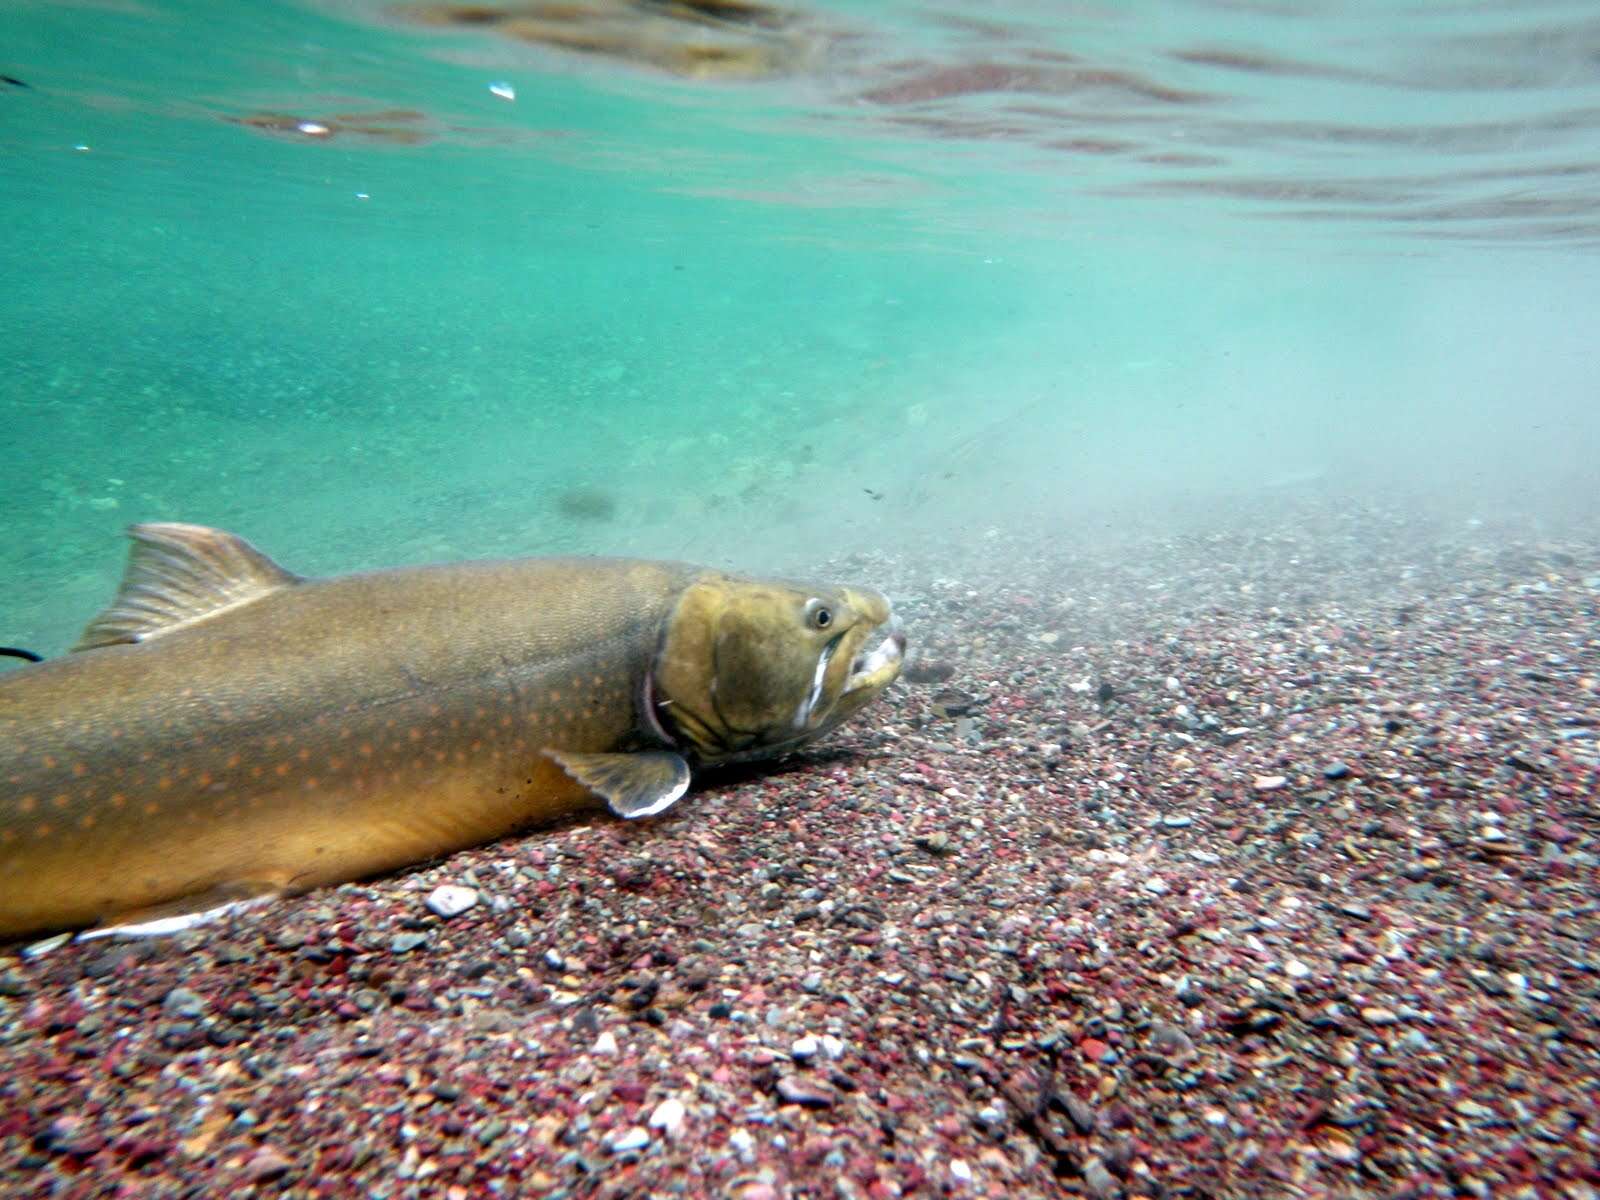 Image of Bull Trout